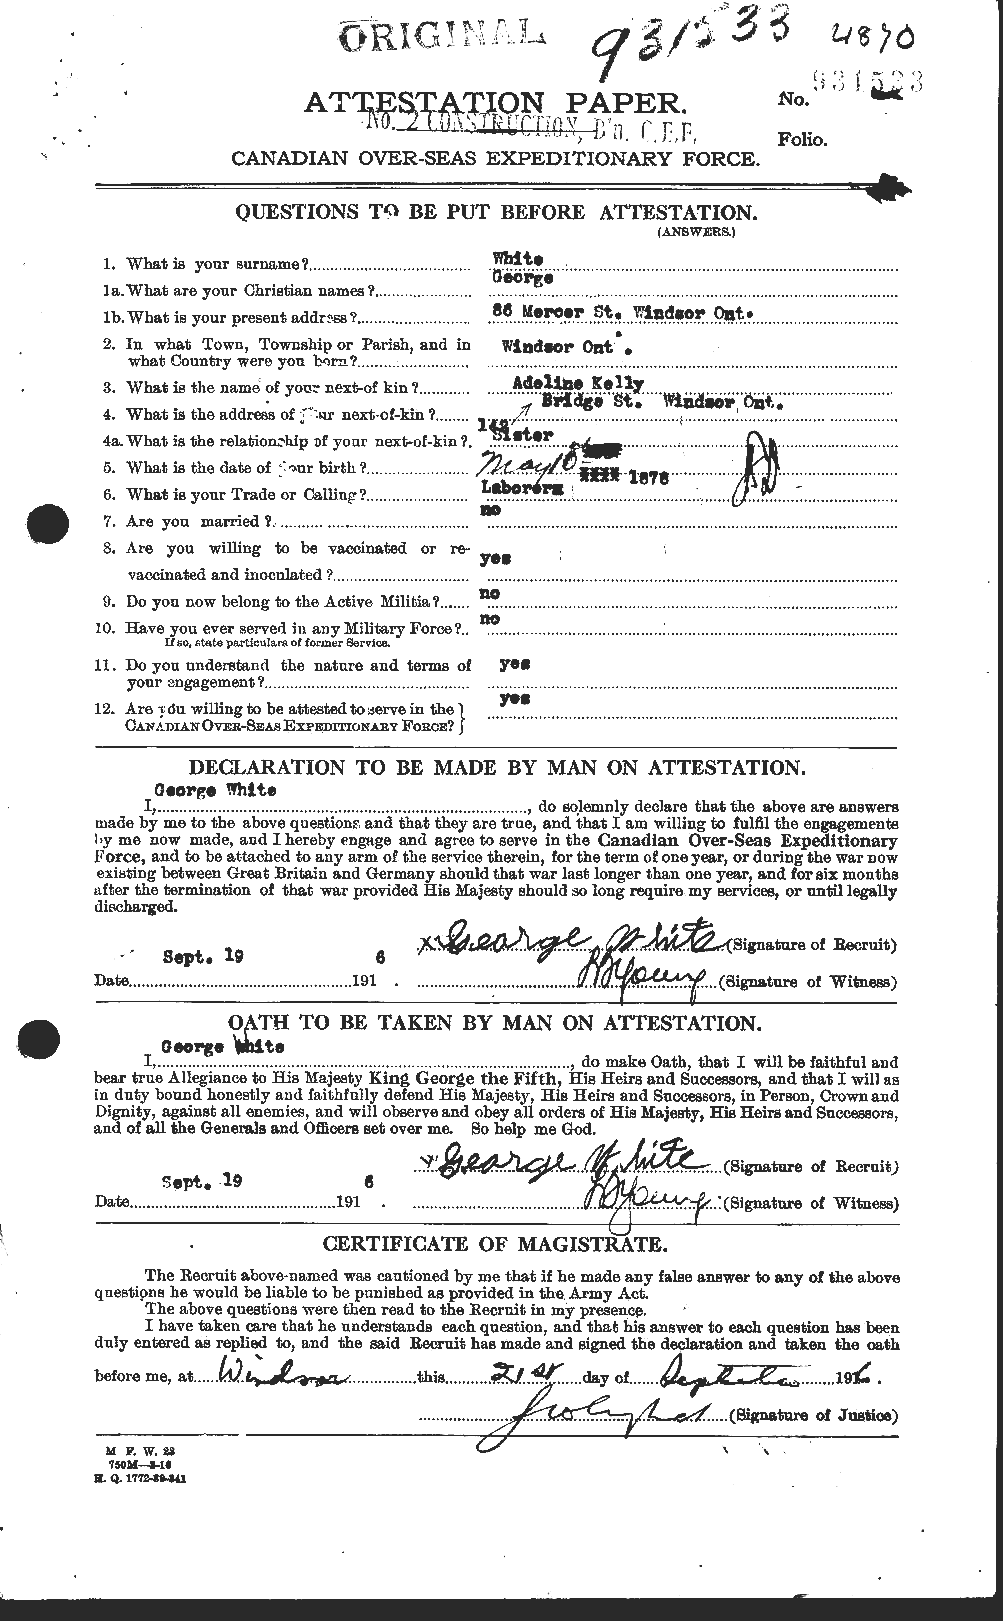 Personnel Records of the First World War - CEF 669458a